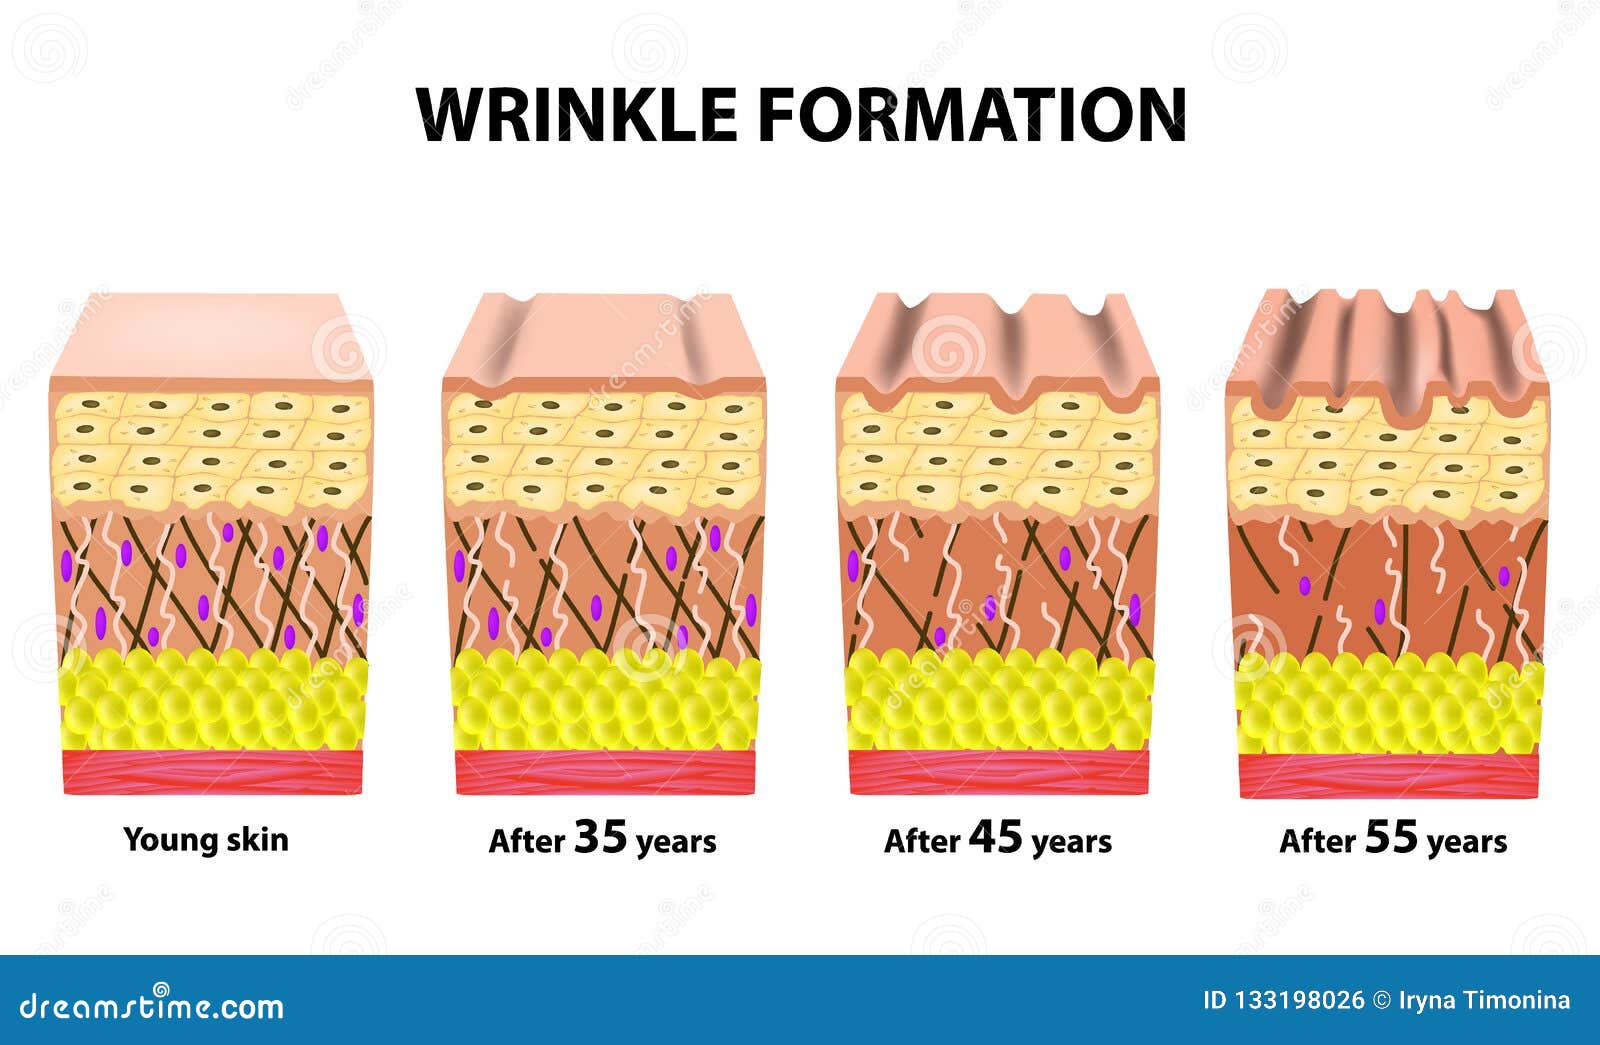 stages of wrinkles at different ages. anatomical structure of the skin. elastin, hyaluronic acid, collagen. infographics